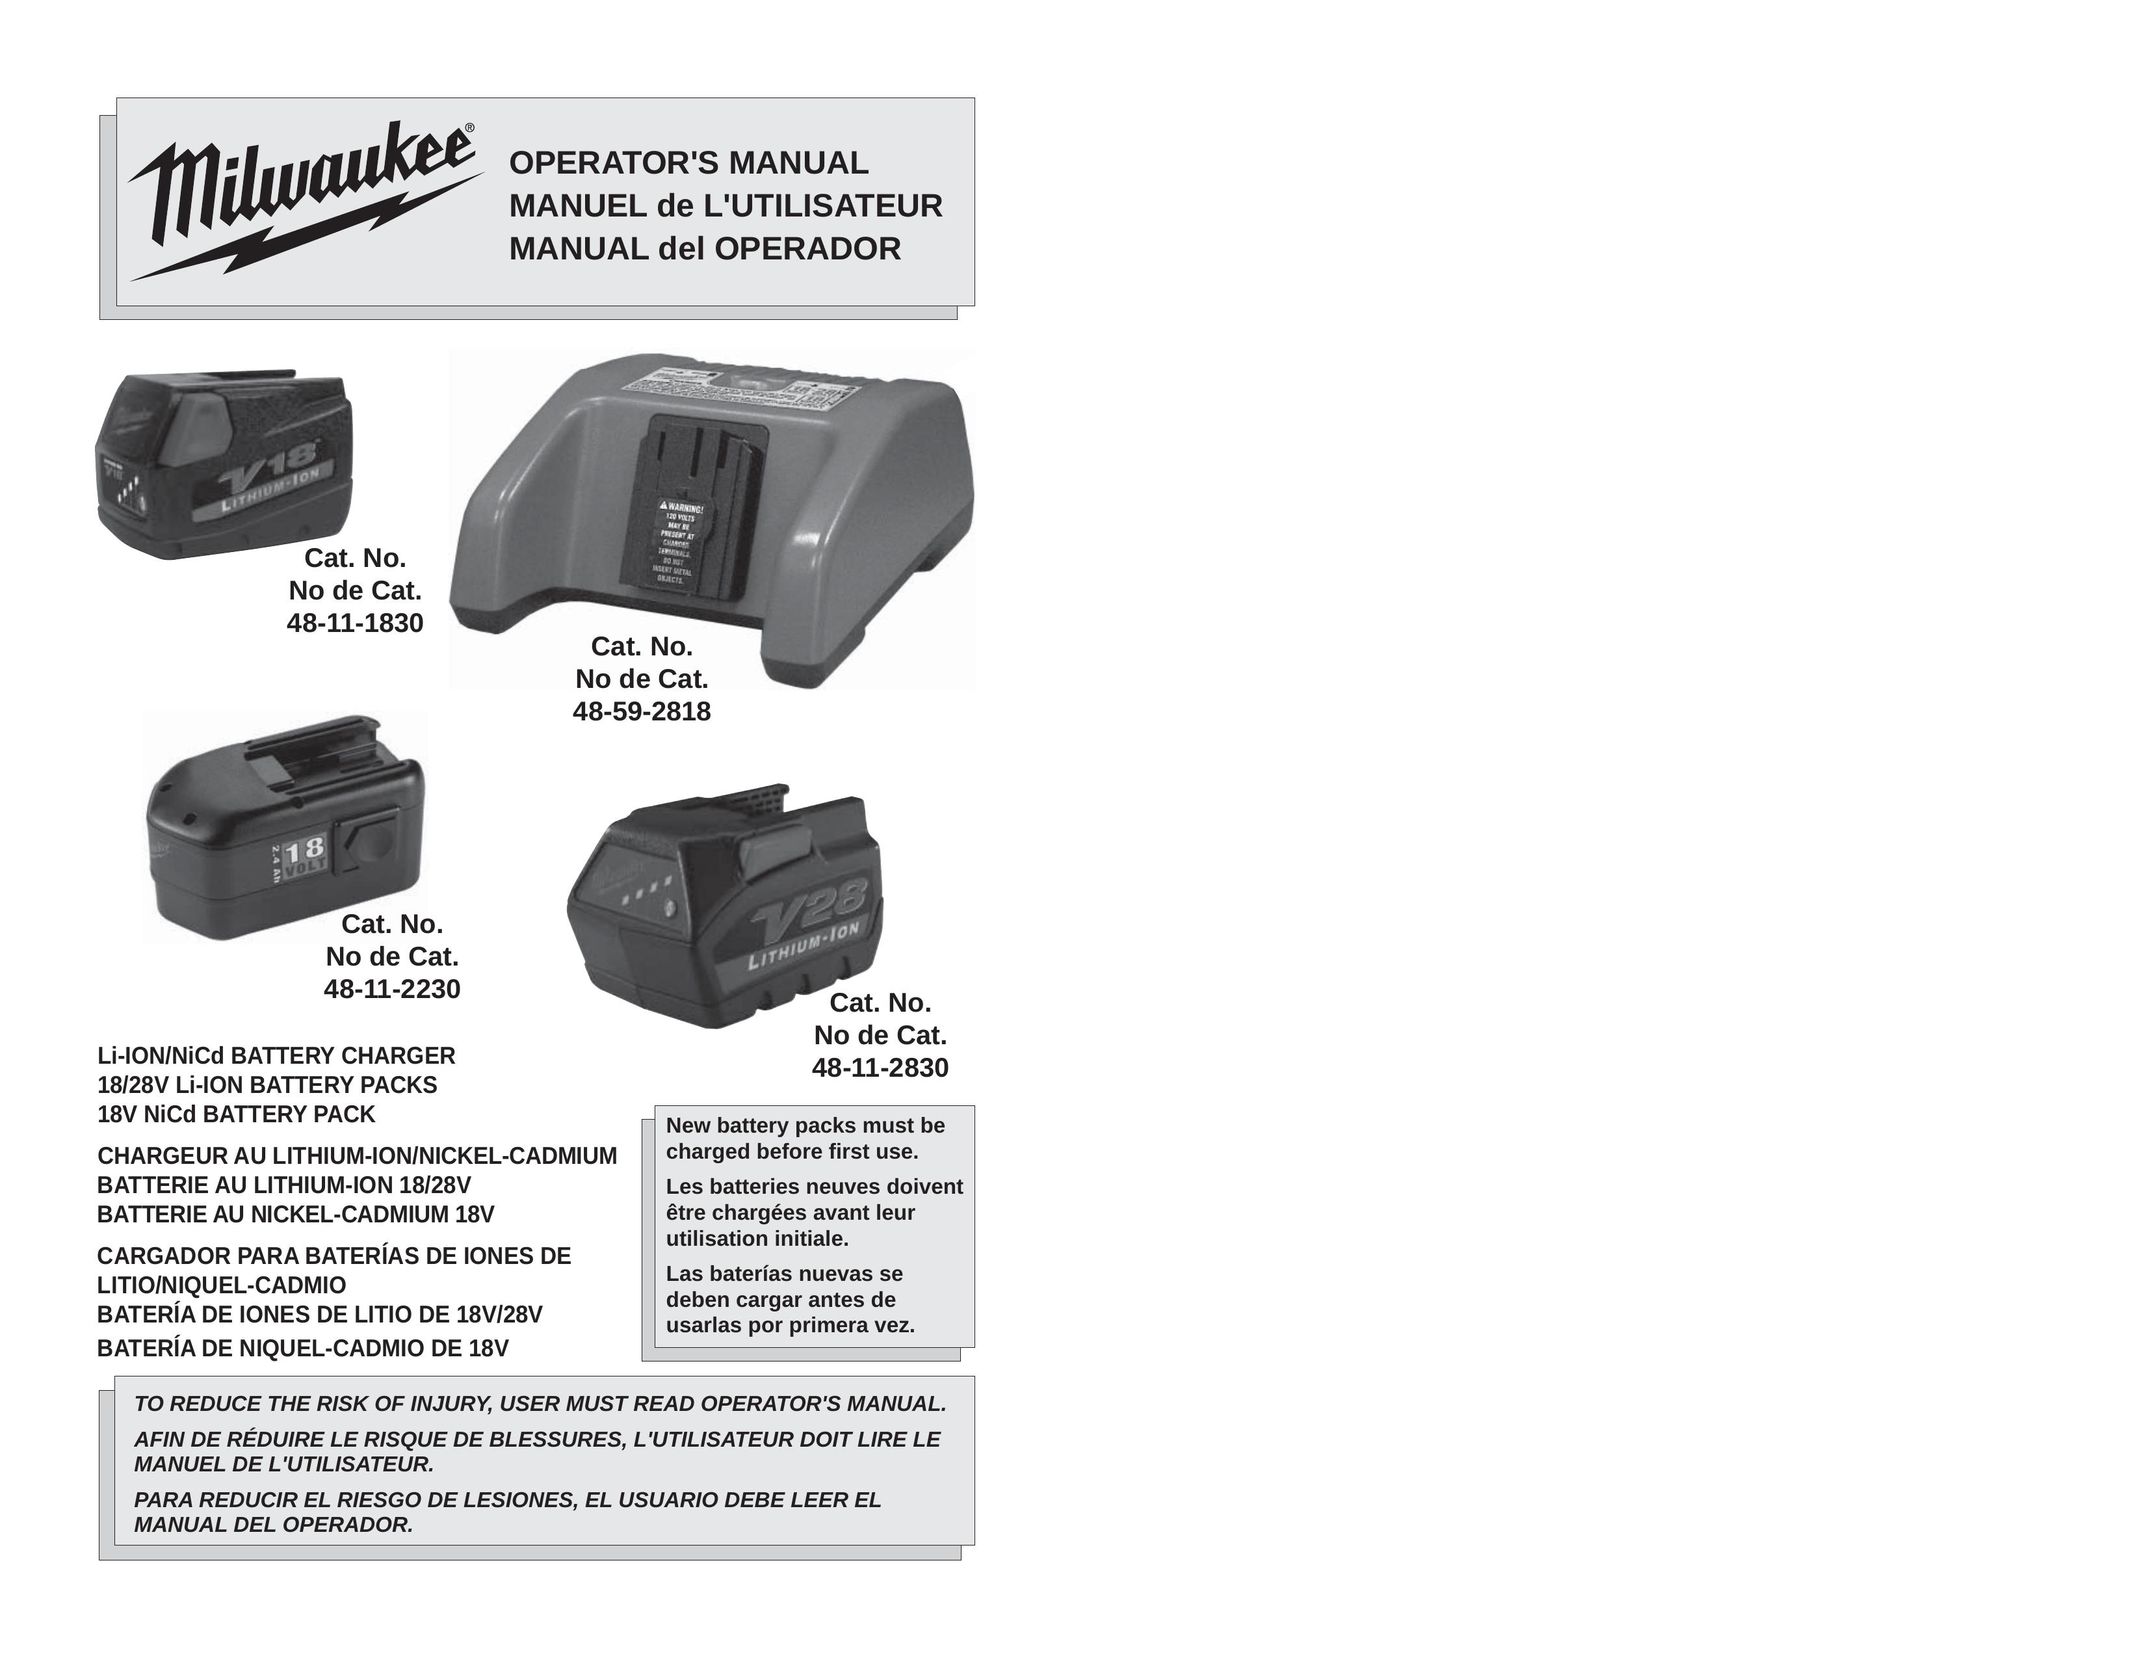 Milwaukee 48-59-2818 Battery Charger User Manual